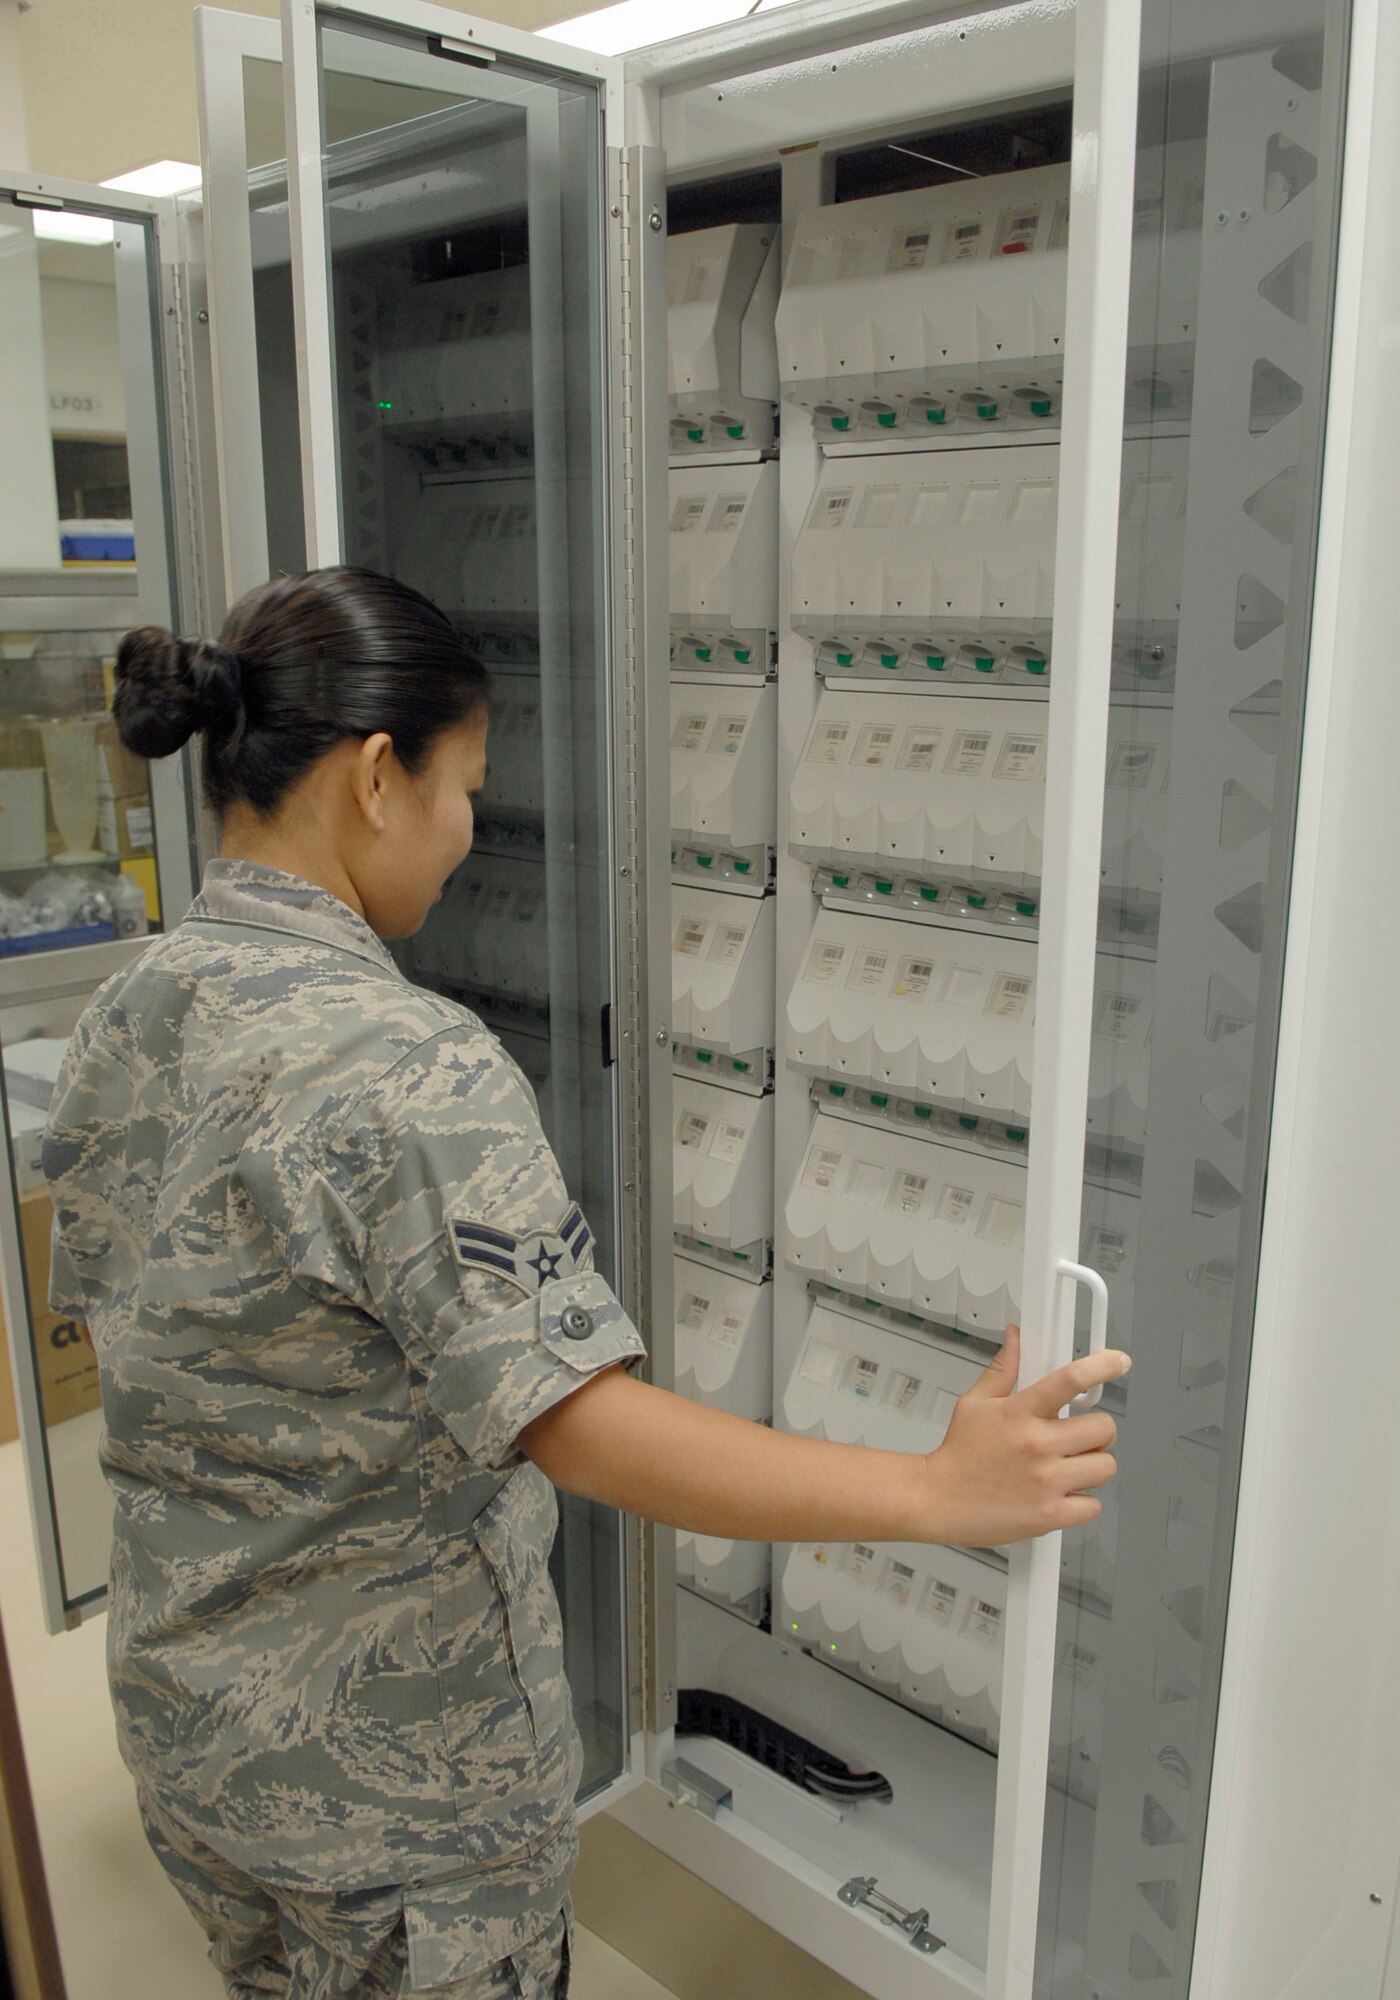 Airman 1st Class Roma Terry reviews the different types of medication the PharmASSIST ROBOTx is stocked with Dec. 10, 2010, at Kadena Air Base, Japan. The PharmASSIST can store anywhere from 70  to 140 prescription dispensers at one time based on pharmacy volume, budget and requirements. Airman Terry is a pharmacy technician with the 18th Medical Support Squadron. (U.S. Air Force photo/Airman 1st Class Tara A. Williamson)
